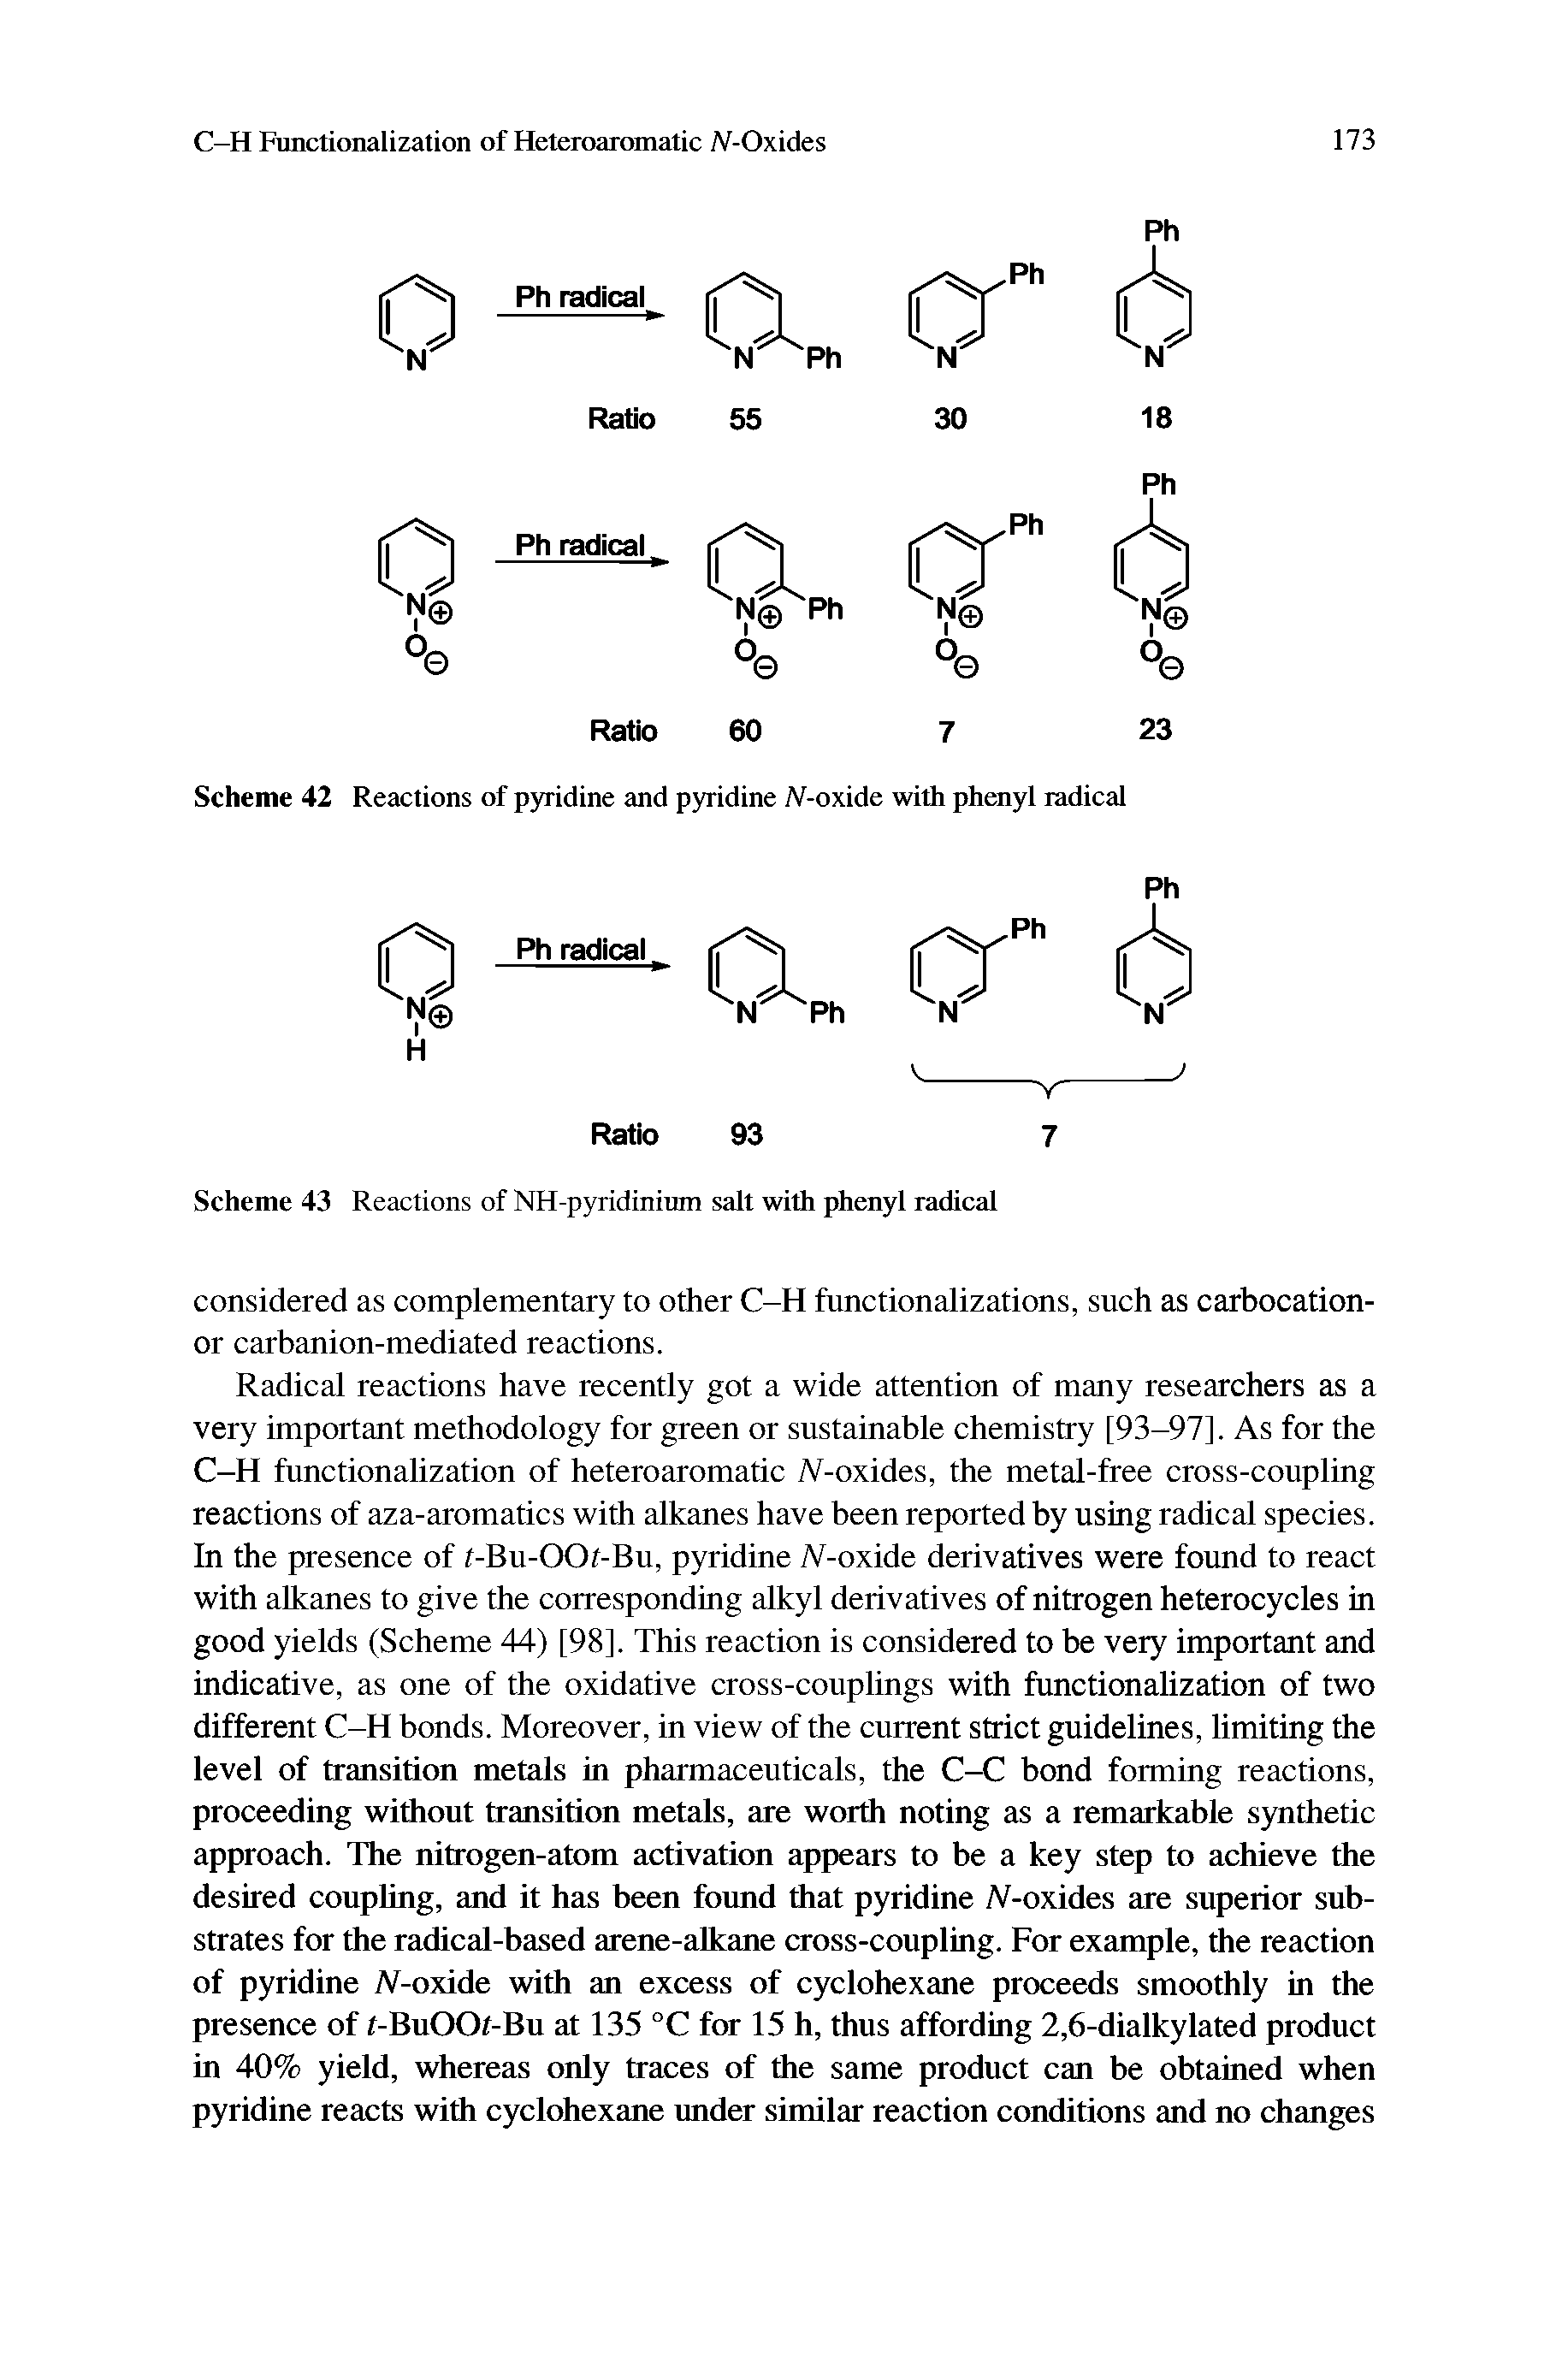 Scheme 42 Reactions of pyridine and pyridine iV-oxide with phenyl radical...